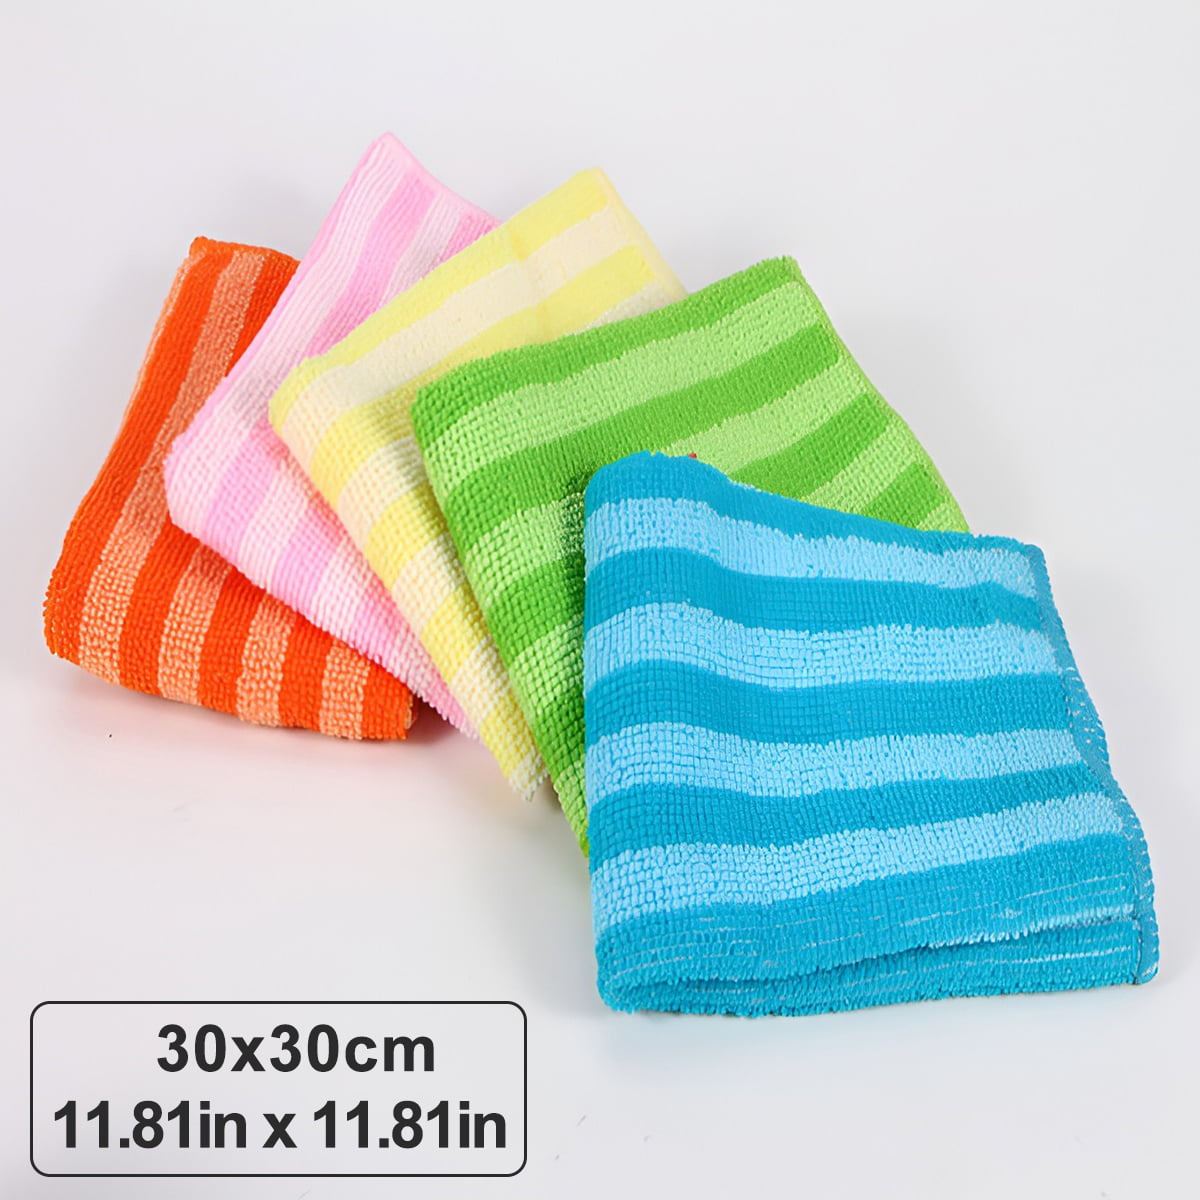 CaTaKu Zebra Print Microfiber Reusable Cleaning Cloths Kitchen Dish Cloths  Dish Rags for Washing Dishes, Black and White Dish Towels Washcloths for